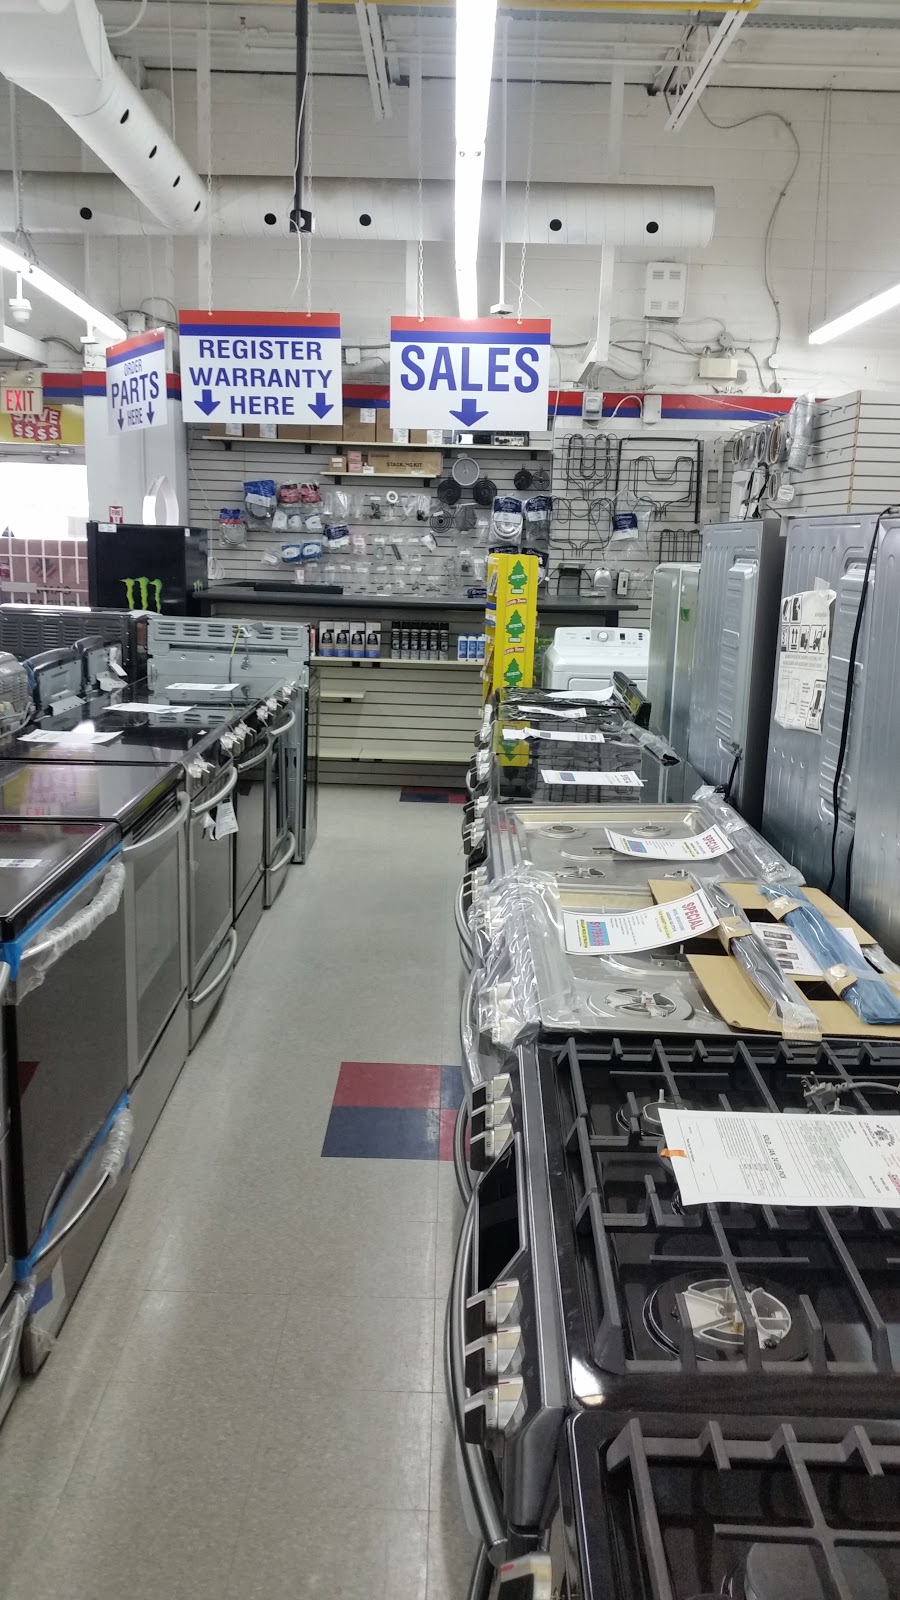 CAN-AM APPLIANCES CENTRE | home goods store | 144 Kennedy Rd S Unit 6, Brampton, ON L6W 1H8, Canada | 9054516660 OR +1 905-451-6660